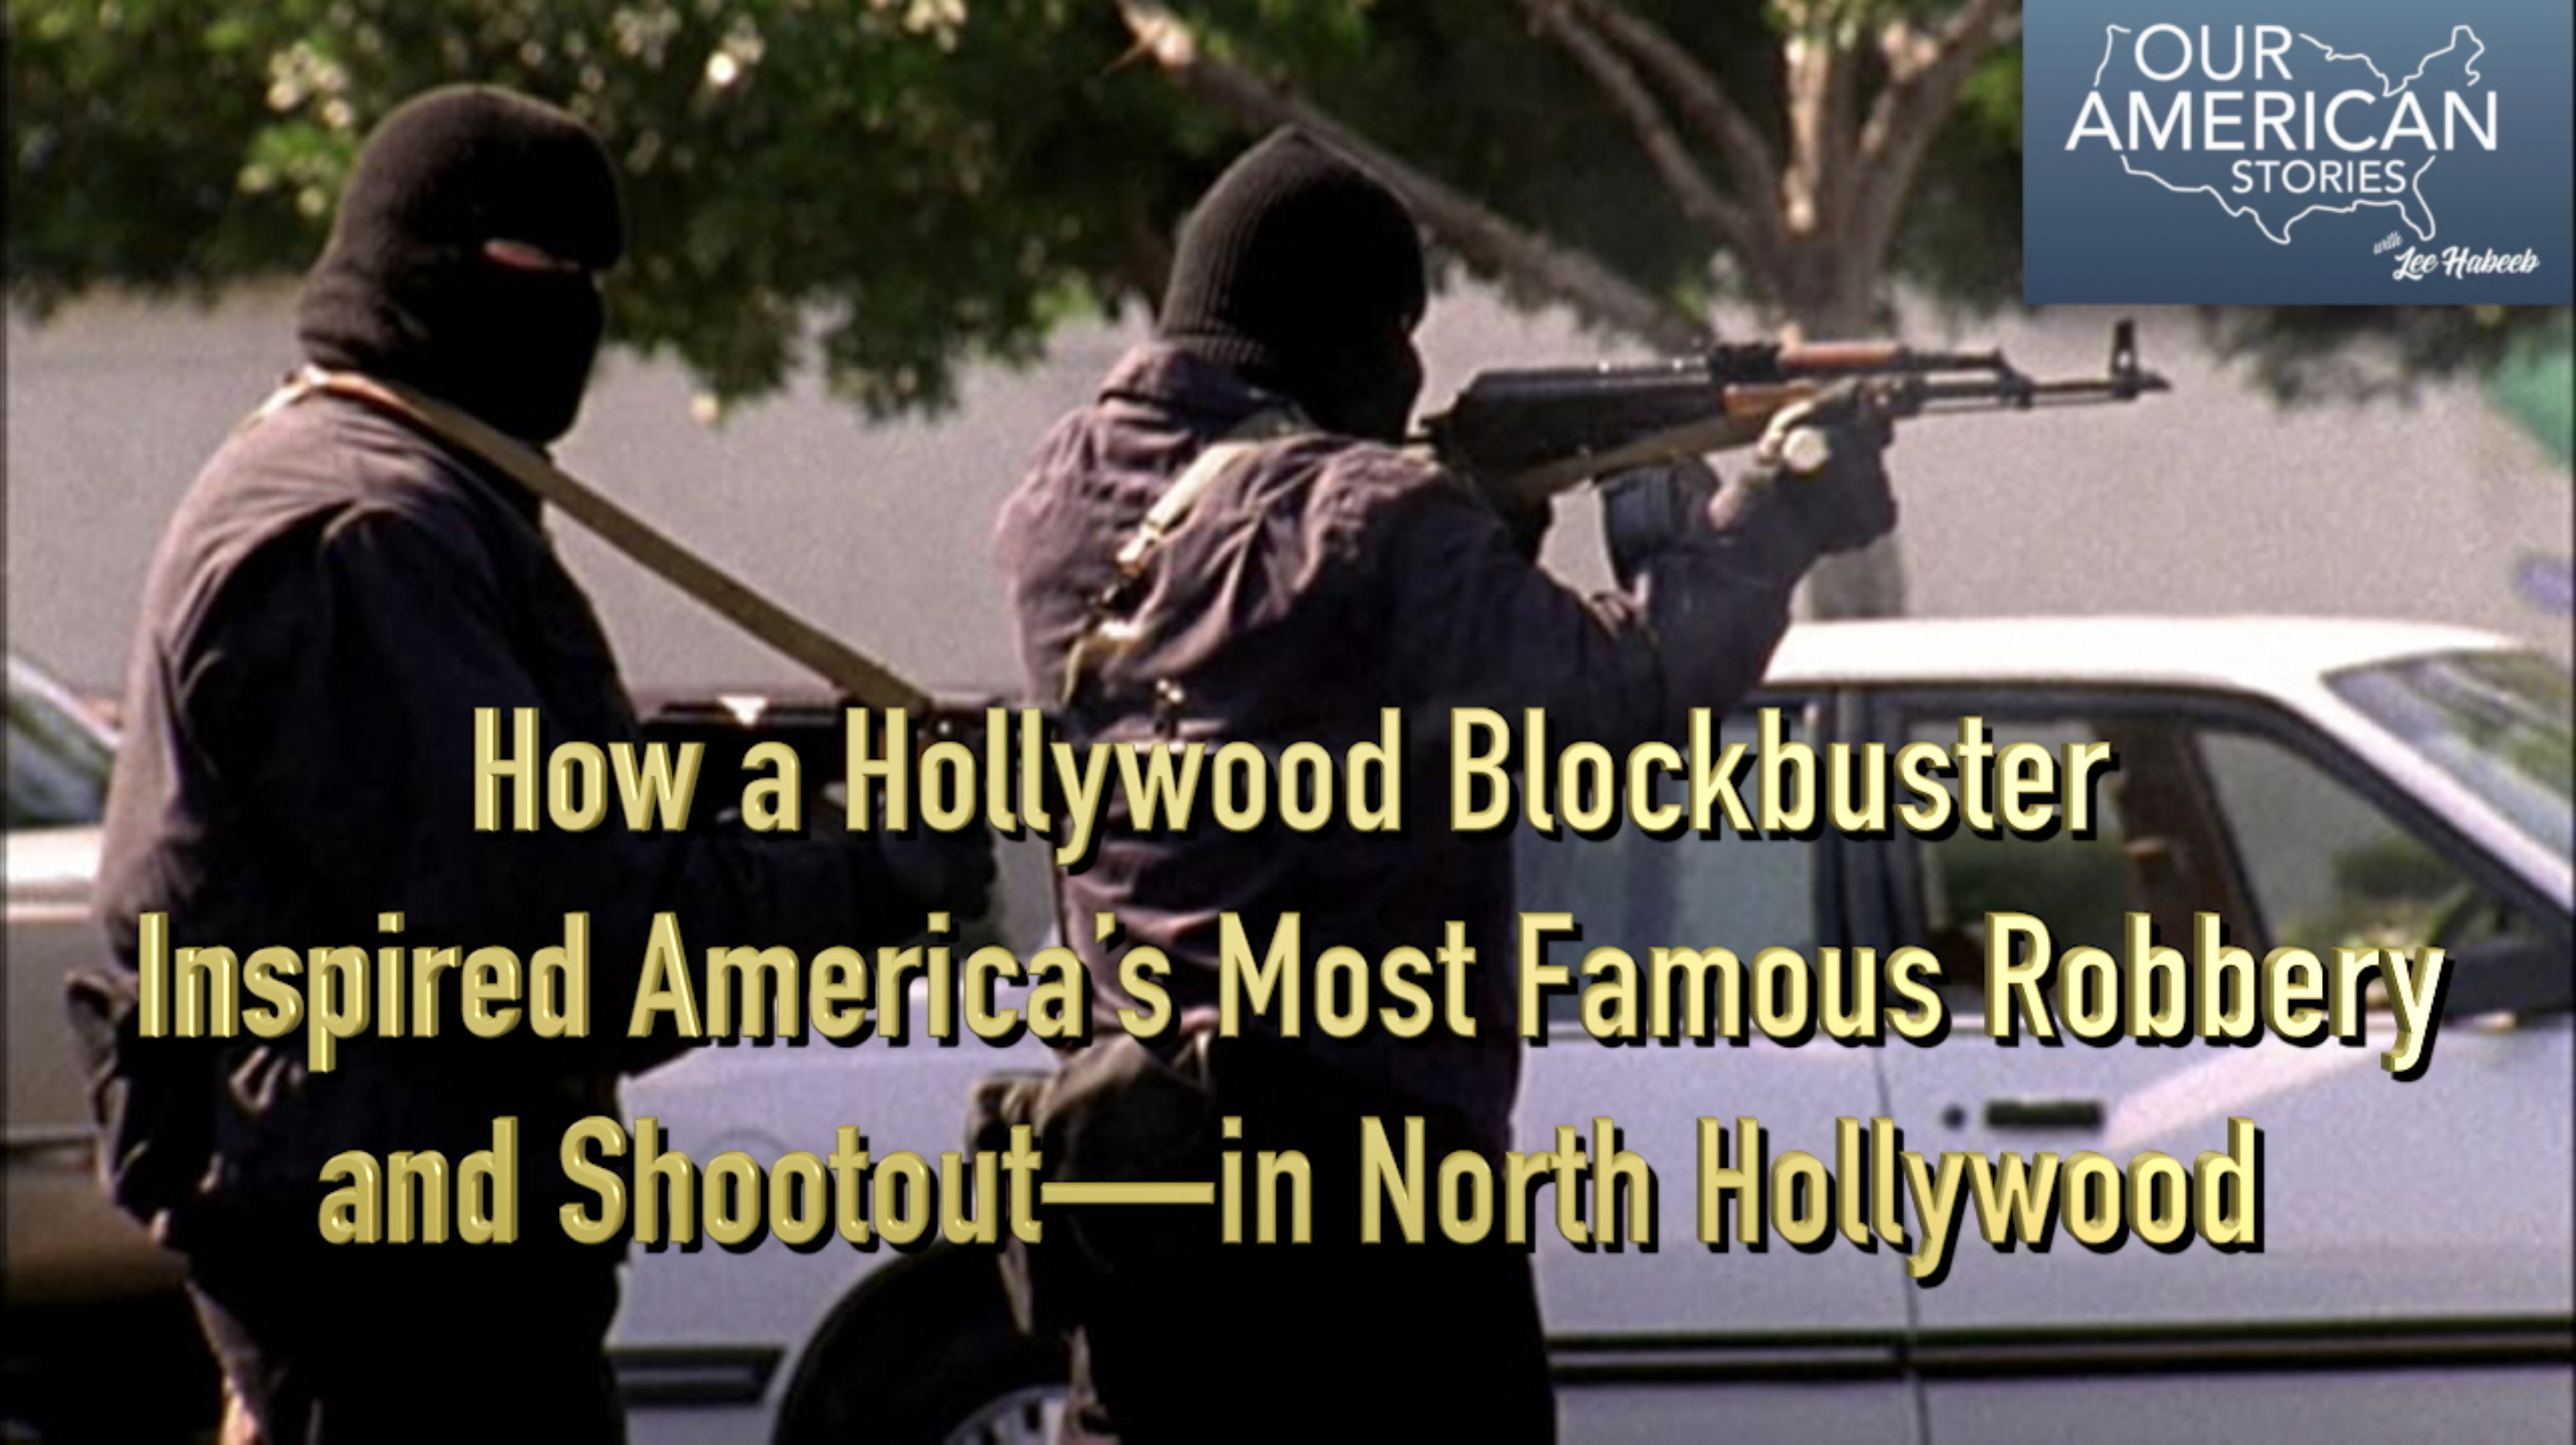 How a Hollywood Blockbuster Inspired America’s Most Famous Robbery and Shootout—in North Hollywood